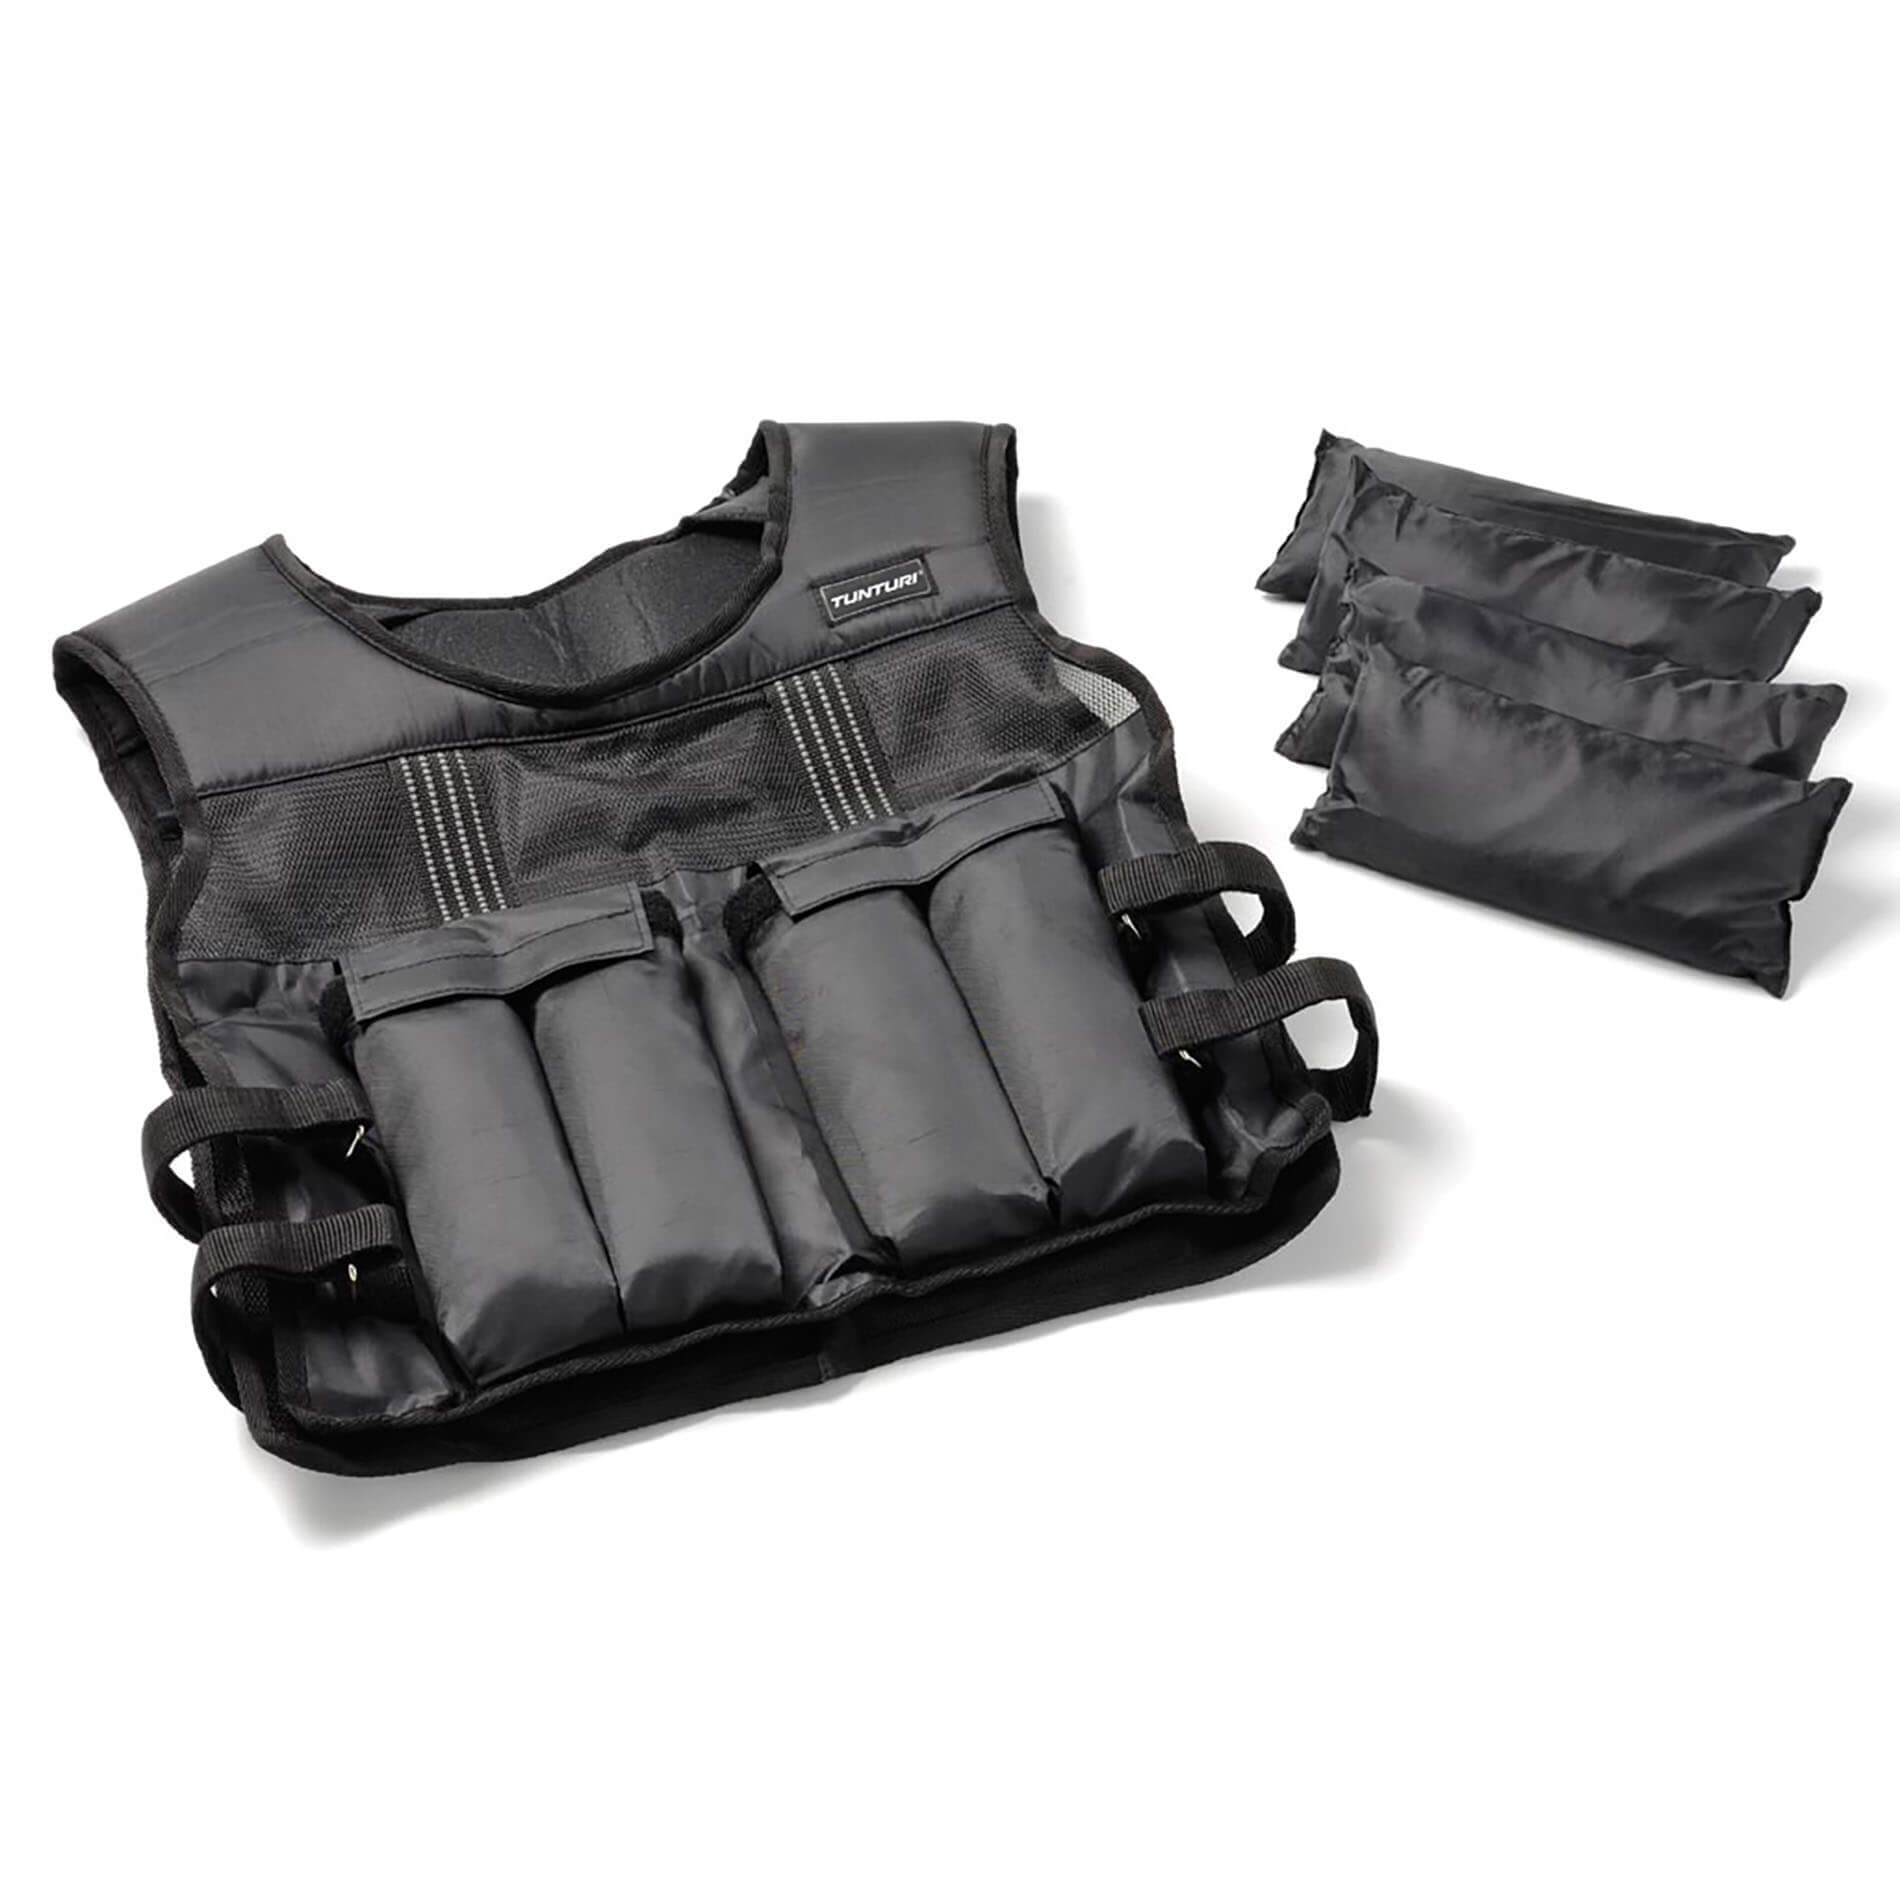 what is a weight vest good for